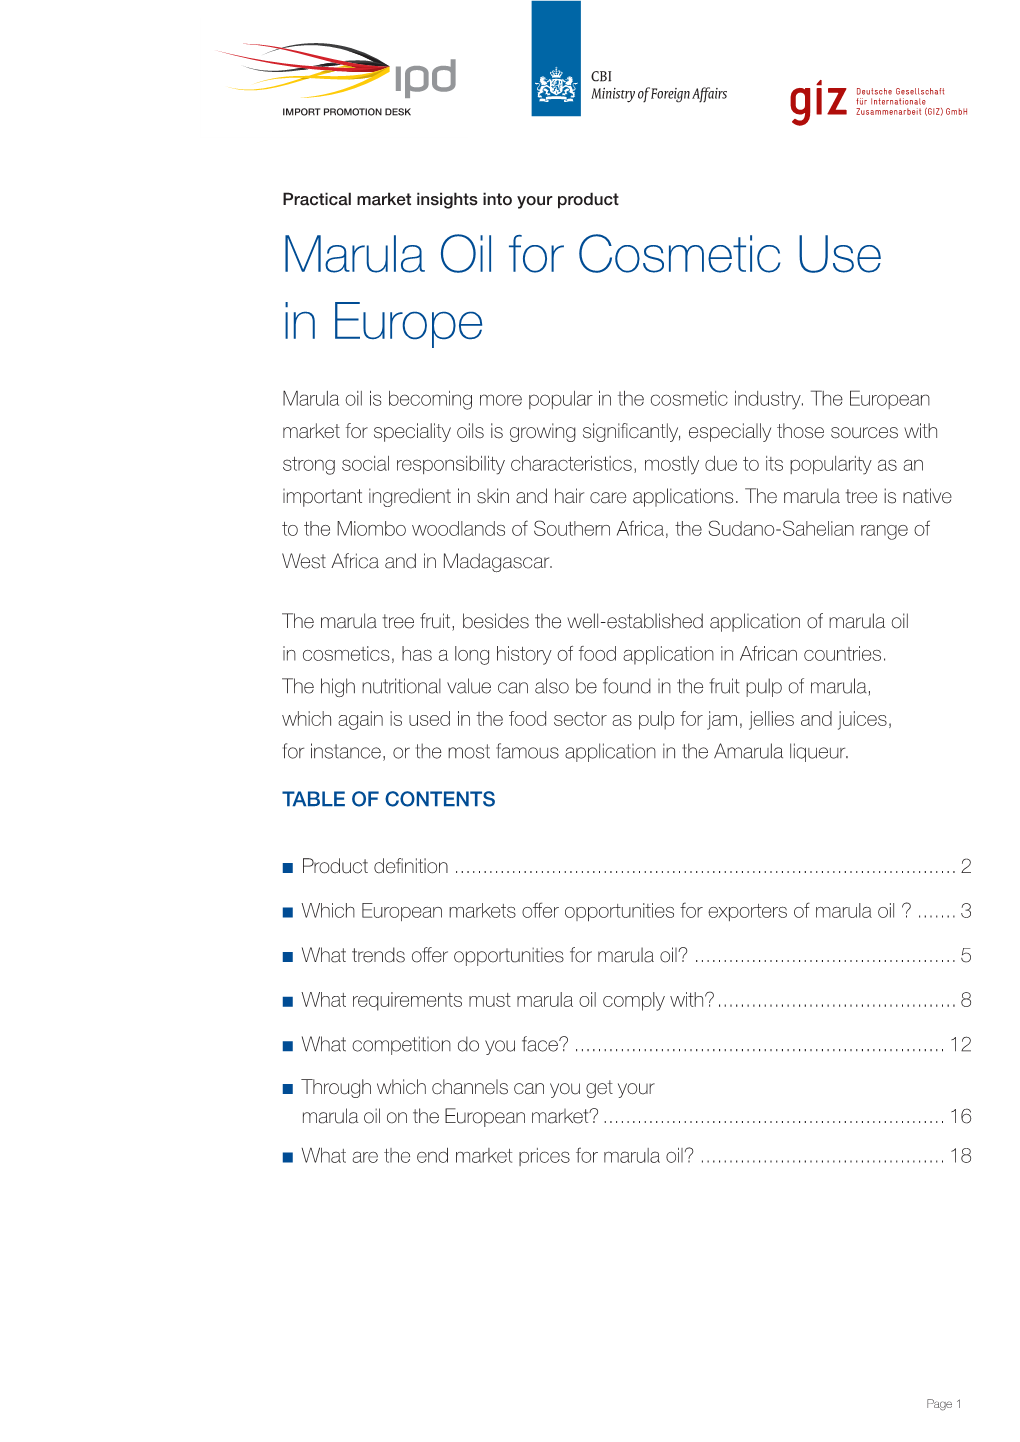 Marula Oil for Cosmetic Use in Europe